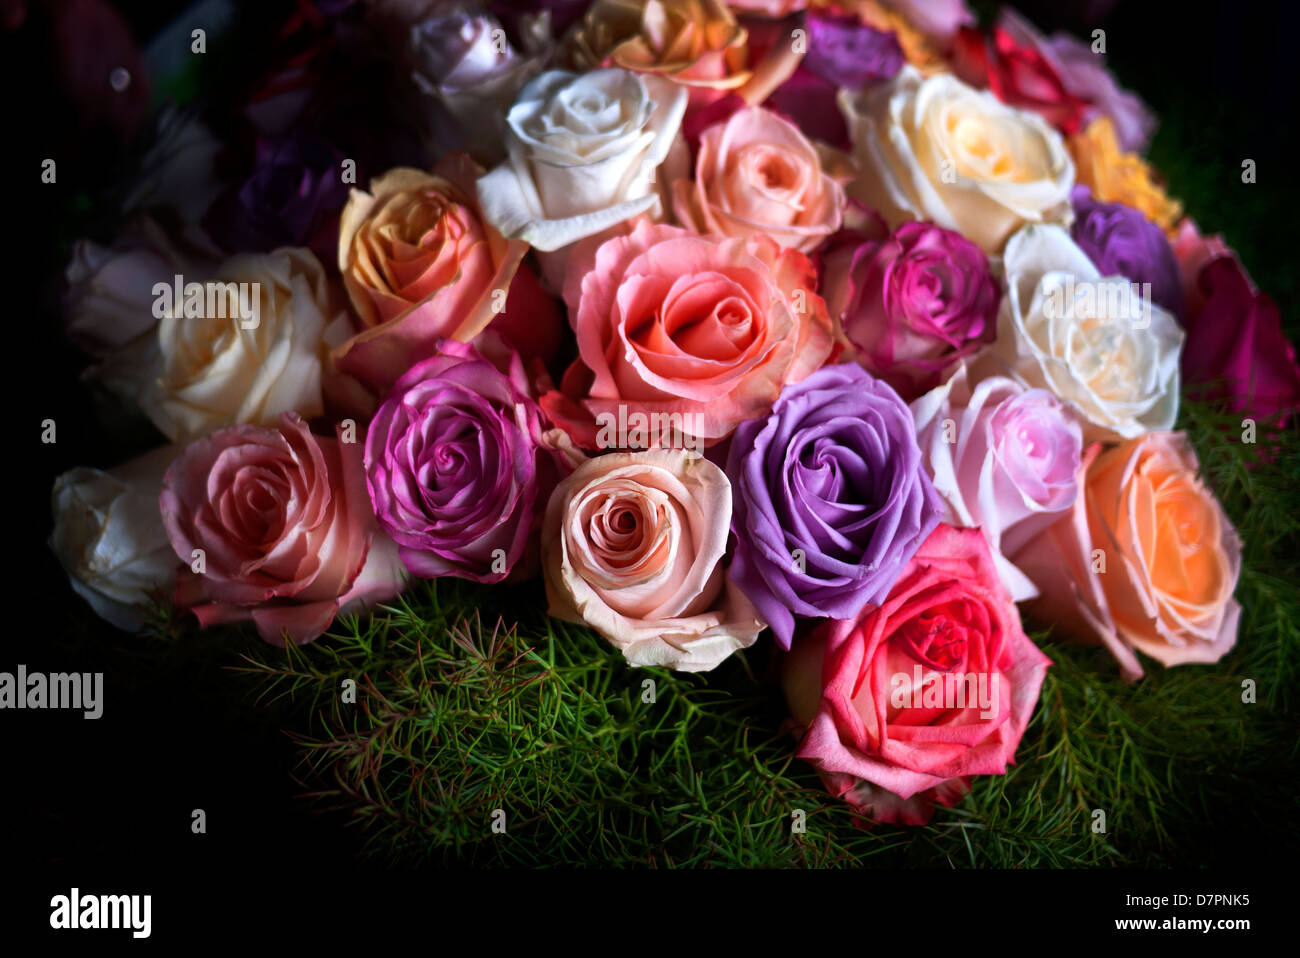 Floral display of roses. Stock Photo